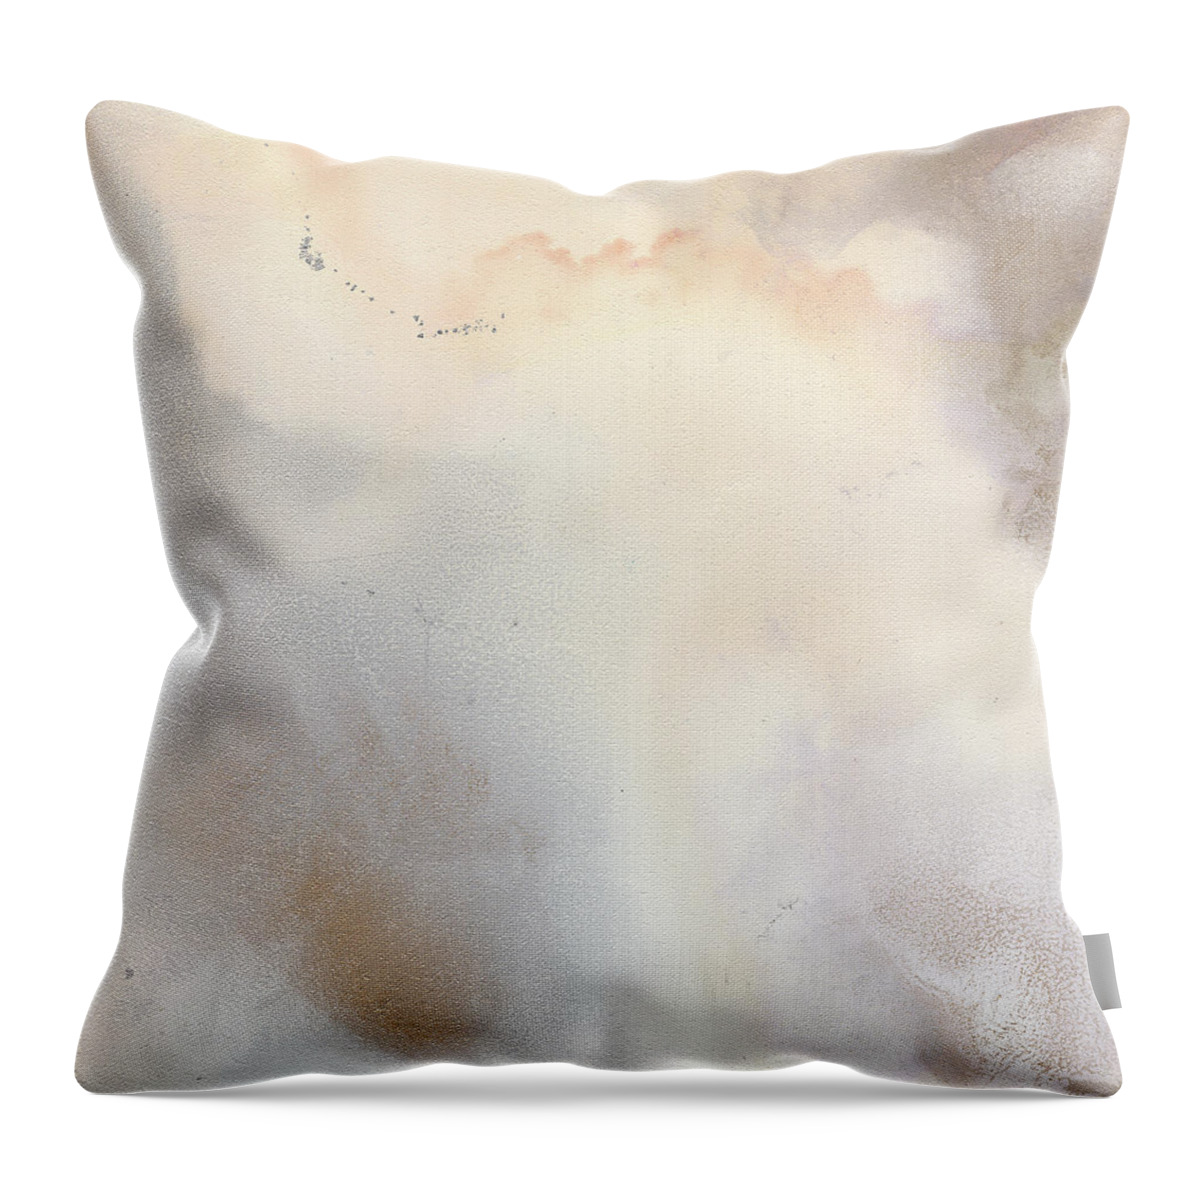 Abstract Throw Pillow featuring the painting Subtle Desires by Jai Johnson